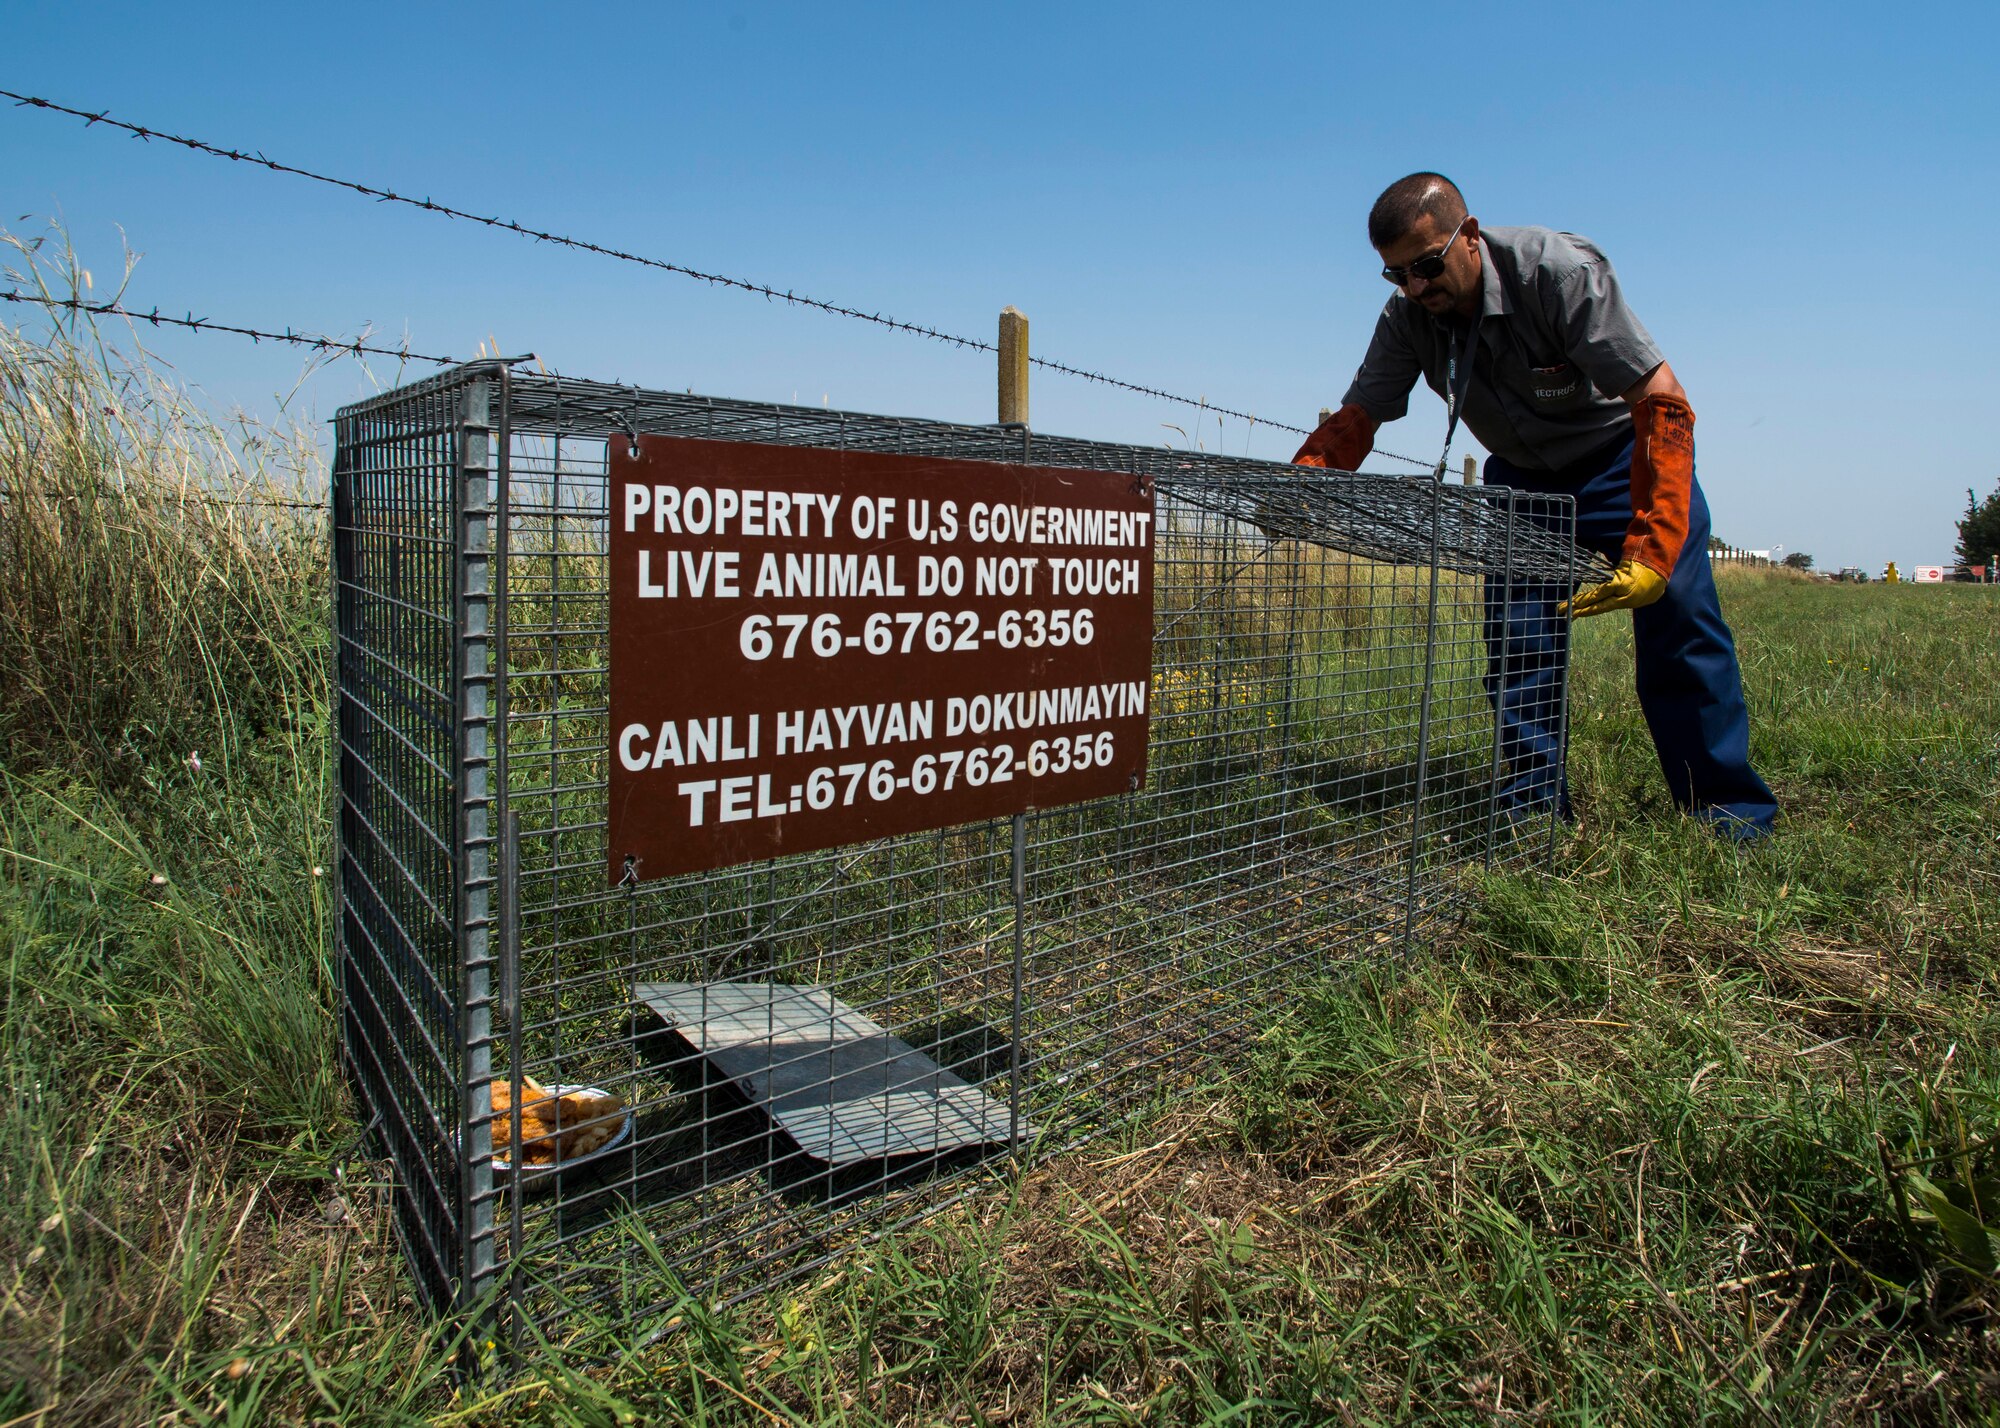 Battal Kocahan, 39th Civil Engineer Squadron pest management employee, sets up a trap to catch stray animals June 9, 2015, at Incirlik Air Base, Turkey. Some of the pesky insects and critters that call IAB their home are mosquitoes, ants, ticks, wasps, spiders, snakes and stray animals. (U.S. Air Force photo by Airman 1st Class Cory W. Bush/Released)